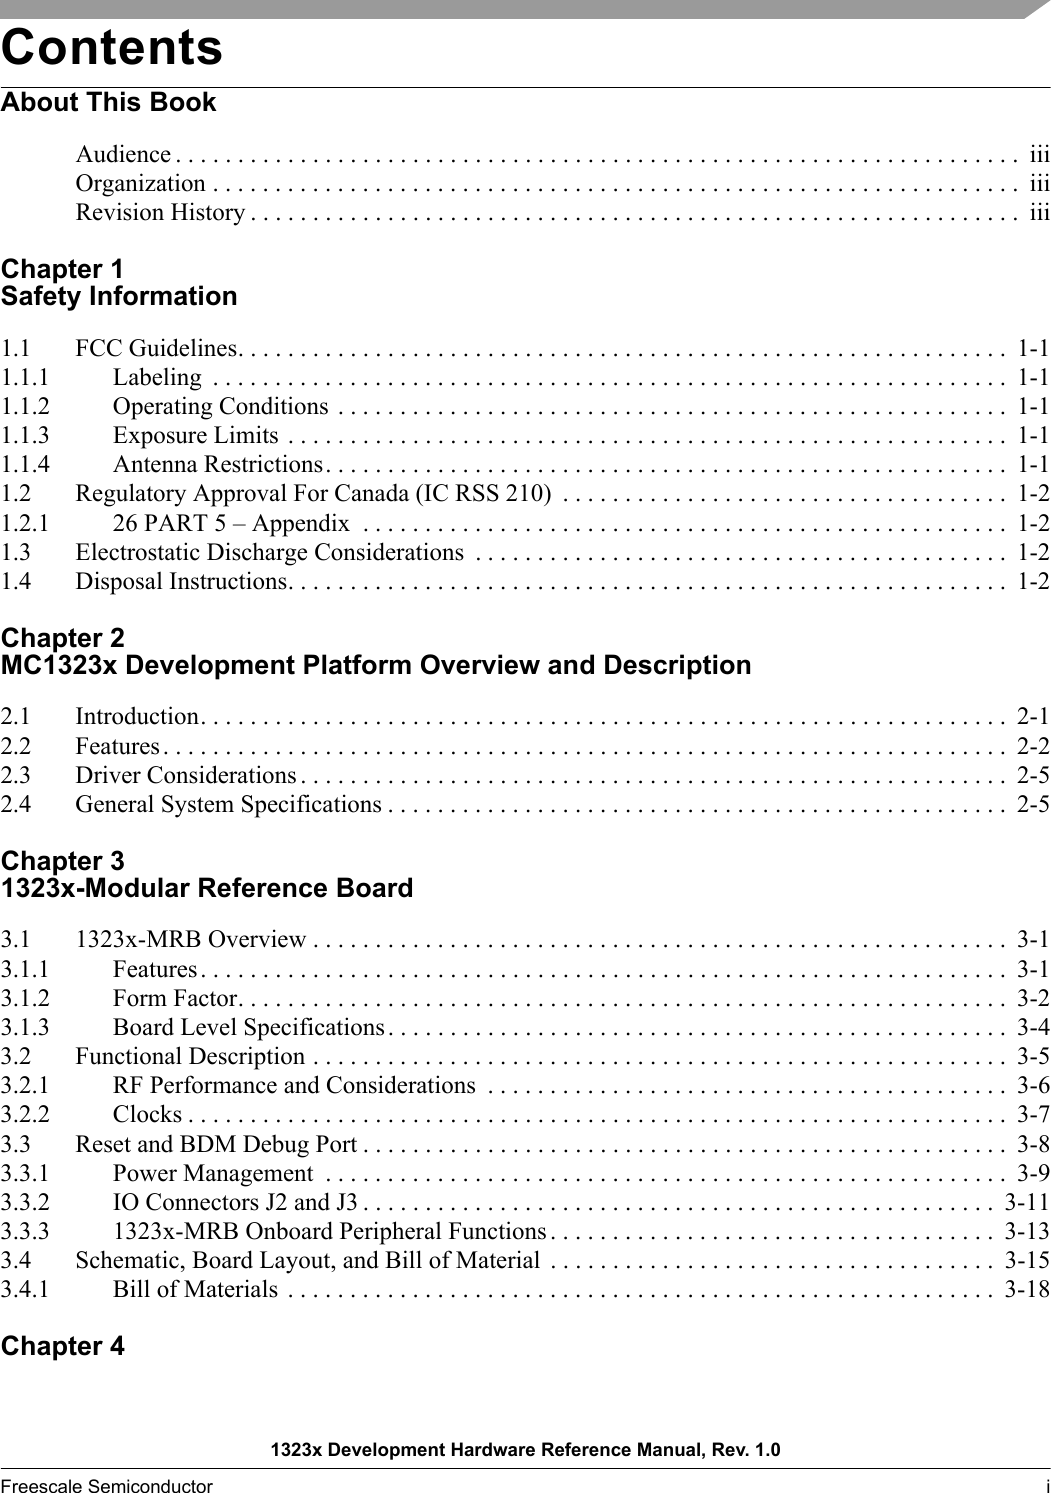 1323x Development Hardware Reference Manual, Rev. 1.0Freescale Semiconductor i  ContentsAbout This BookAudience . . . . . . . . . . . . . . . . . . . . . . . . . . . . . . . . . . . . . . . . . . . . . . . . . . . . . . . . . . . . . . . . . . . .  iiiOrganization . . . . . . . . . . . . . . . . . . . . . . . . . . . . . . . . . . . . . . . . . . . . . . . . . . . . . . . . . . . . . . . . .  iiiRevision History . . . . . . . . . . . . . . . . . . . . . . . . . . . . . . . . . . . . . . . . . . . . . . . . . . . . . . . . . . . . . .  iiiChapter 1 Safety Information1.1 FCC Guidelines. . . . . . . . . . . . . . . . . . . . . . . . . . . . . . . . . . . . . . . . . . . . . . . . . . . . . . . . . . . . . .  1-11.1.1 Labeling  . . . . . . . . . . . . . . . . . . . . . . . . . . . . . . . . . . . . . . . . . . . . . . . . . . . . . . . . . . . . . . . .  1-11.1.2 Operating Conditions . . . . . . . . . . . . . . . . . . . . . . . . . . . . . . . . . . . . . . . . . . . . . . . . . . . . . .  1-11.1.3 Exposure Limits . . . . . . . . . . . . . . . . . . . . . . . . . . . . . . . . . . . . . . . . . . . . . . . . . . . . . . . . . .  1-11.1.4 Antenna Restrictions. . . . . . . . . . . . . . . . . . . . . . . . . . . . . . . . . . . . . . . . . . . . . . . . . . . . . . .  1-11.2 Regulatory Approval For Canada (IC RSS 210)  . . . . . . . . . . . . . . . . . . . . . . . . . . . . . . . . . . . .  1-21.2.1 26 PART 5 – Appendix  . . . . . . . . . . . . . . . . . . . . . . . . . . . . . . . . . . . . . . . . . . . . . . . . . . . .  1-21.3 Electrostatic Discharge Considerations  . . . . . . . . . . . . . . . . . . . . . . . . . . . . . . . . . . . . . . . . . . . 1-21.4 Disposal Instructions. . . . . . . . . . . . . . . . . . . . . . . . . . . . . . . . . . . . . . . . . . . . . . . . . . . . . . . . . .  1-2Chapter 2 MC1323x Development Platform Overview and Description2.1 Introduction. . . . . . . . . . . . . . . . . . . . . . . . . . . . . . . . . . . . . . . . . . . . . . . . . . . . . . . . . . . . . . . . .  2-12.2 Features. . . . . . . . . . . . . . . . . . . . . . . . . . . . . . . . . . . . . . . . . . . . . . . . . . . . . . . . . . . . . . . . . . . .  2-22.3 Driver Considerations . . . . . . . . . . . . . . . . . . . . . . . . . . . . . . . . . . . . . . . . . . . . . . . . . . . . . . . . .  2-52.4 General System Specifications . . . . . . . . . . . . . . . . . . . . . . . . . . . . . . . . . . . . . . . . . . . . . . . . . .  2-5Chapter 3 1323x-Modular Reference Board3.1 1323x-MRB Overview . . . . . . . . . . . . . . . . . . . . . . . . . . . . . . . . . . . . . . . . . . . . . . . . . . . . . . . .  3-13.1.1 Features. . . . . . . . . . . . . . . . . . . . . . . . . . . . . . . . . . . . . . . . . . . . . . . . . . . . . . . . . . . . . . . . .  3-13.1.2 Form Factor. . . . . . . . . . . . . . . . . . . . . . . . . . . . . . . . . . . . . . . . . . . . . . . . . . . . . . . . . . . . . .  3-23.1.3 Board Level Specifications. . . . . . . . . . . . . . . . . . . . . . . . . . . . . . . . . . . . . . . . . . . . . . . . . .  3-43.2 Functional Description . . . . . . . . . . . . . . . . . . . . . . . . . . . . . . . . . . . . . . . . . . . . . . . . . . . . . . . .  3-53.2.1 RF Performance and Considerations  . . . . . . . . . . . . . . . . . . . . . . . . . . . . . . . . . . . . . . . . . .  3-63.2.2 Clocks . . . . . . . . . . . . . . . . . . . . . . . . . . . . . . . . . . . . . . . . . . . . . . . . . . . . . . . . . . . . . . . . . .  3-73.3 Reset and BDM Debug Port . . . . . . . . . . . . . . . . . . . . . . . . . . . . . . . . . . . . . . . . . . . . . . . . . . . .  3-83.3.1 Power Management  . . . . . . . . . . . . . . . . . . . . . . . . . . . . . . . . . . . . . . . . . . . . . . . . . . . . . . .  3-93.3.2 IO Connectors J2 and J3 . . . . . . . . . . . . . . . . . . . . . . . . . . . . . . . . . . . . . . . . . . . . . . . . . . .  3-113.3.3 1323x-MRB Onboard Peripheral Functions . . . . . . . . . . . . . . . . . . . . . . . . . . . . . . . . . . . .  3-133.4 Schematic, Board Layout, and Bill of Material  . . . . . . . . . . . . . . . . . . . . . . . . . . . . . . . . . . . .  3-153.4.1 Bill of Materials  . . . . . . . . . . . . . . . . . . . . . . . . . . . . . . . . . . . . . . . . . . . . . . . . . . . . . . . . .  3-18Chapter 4 